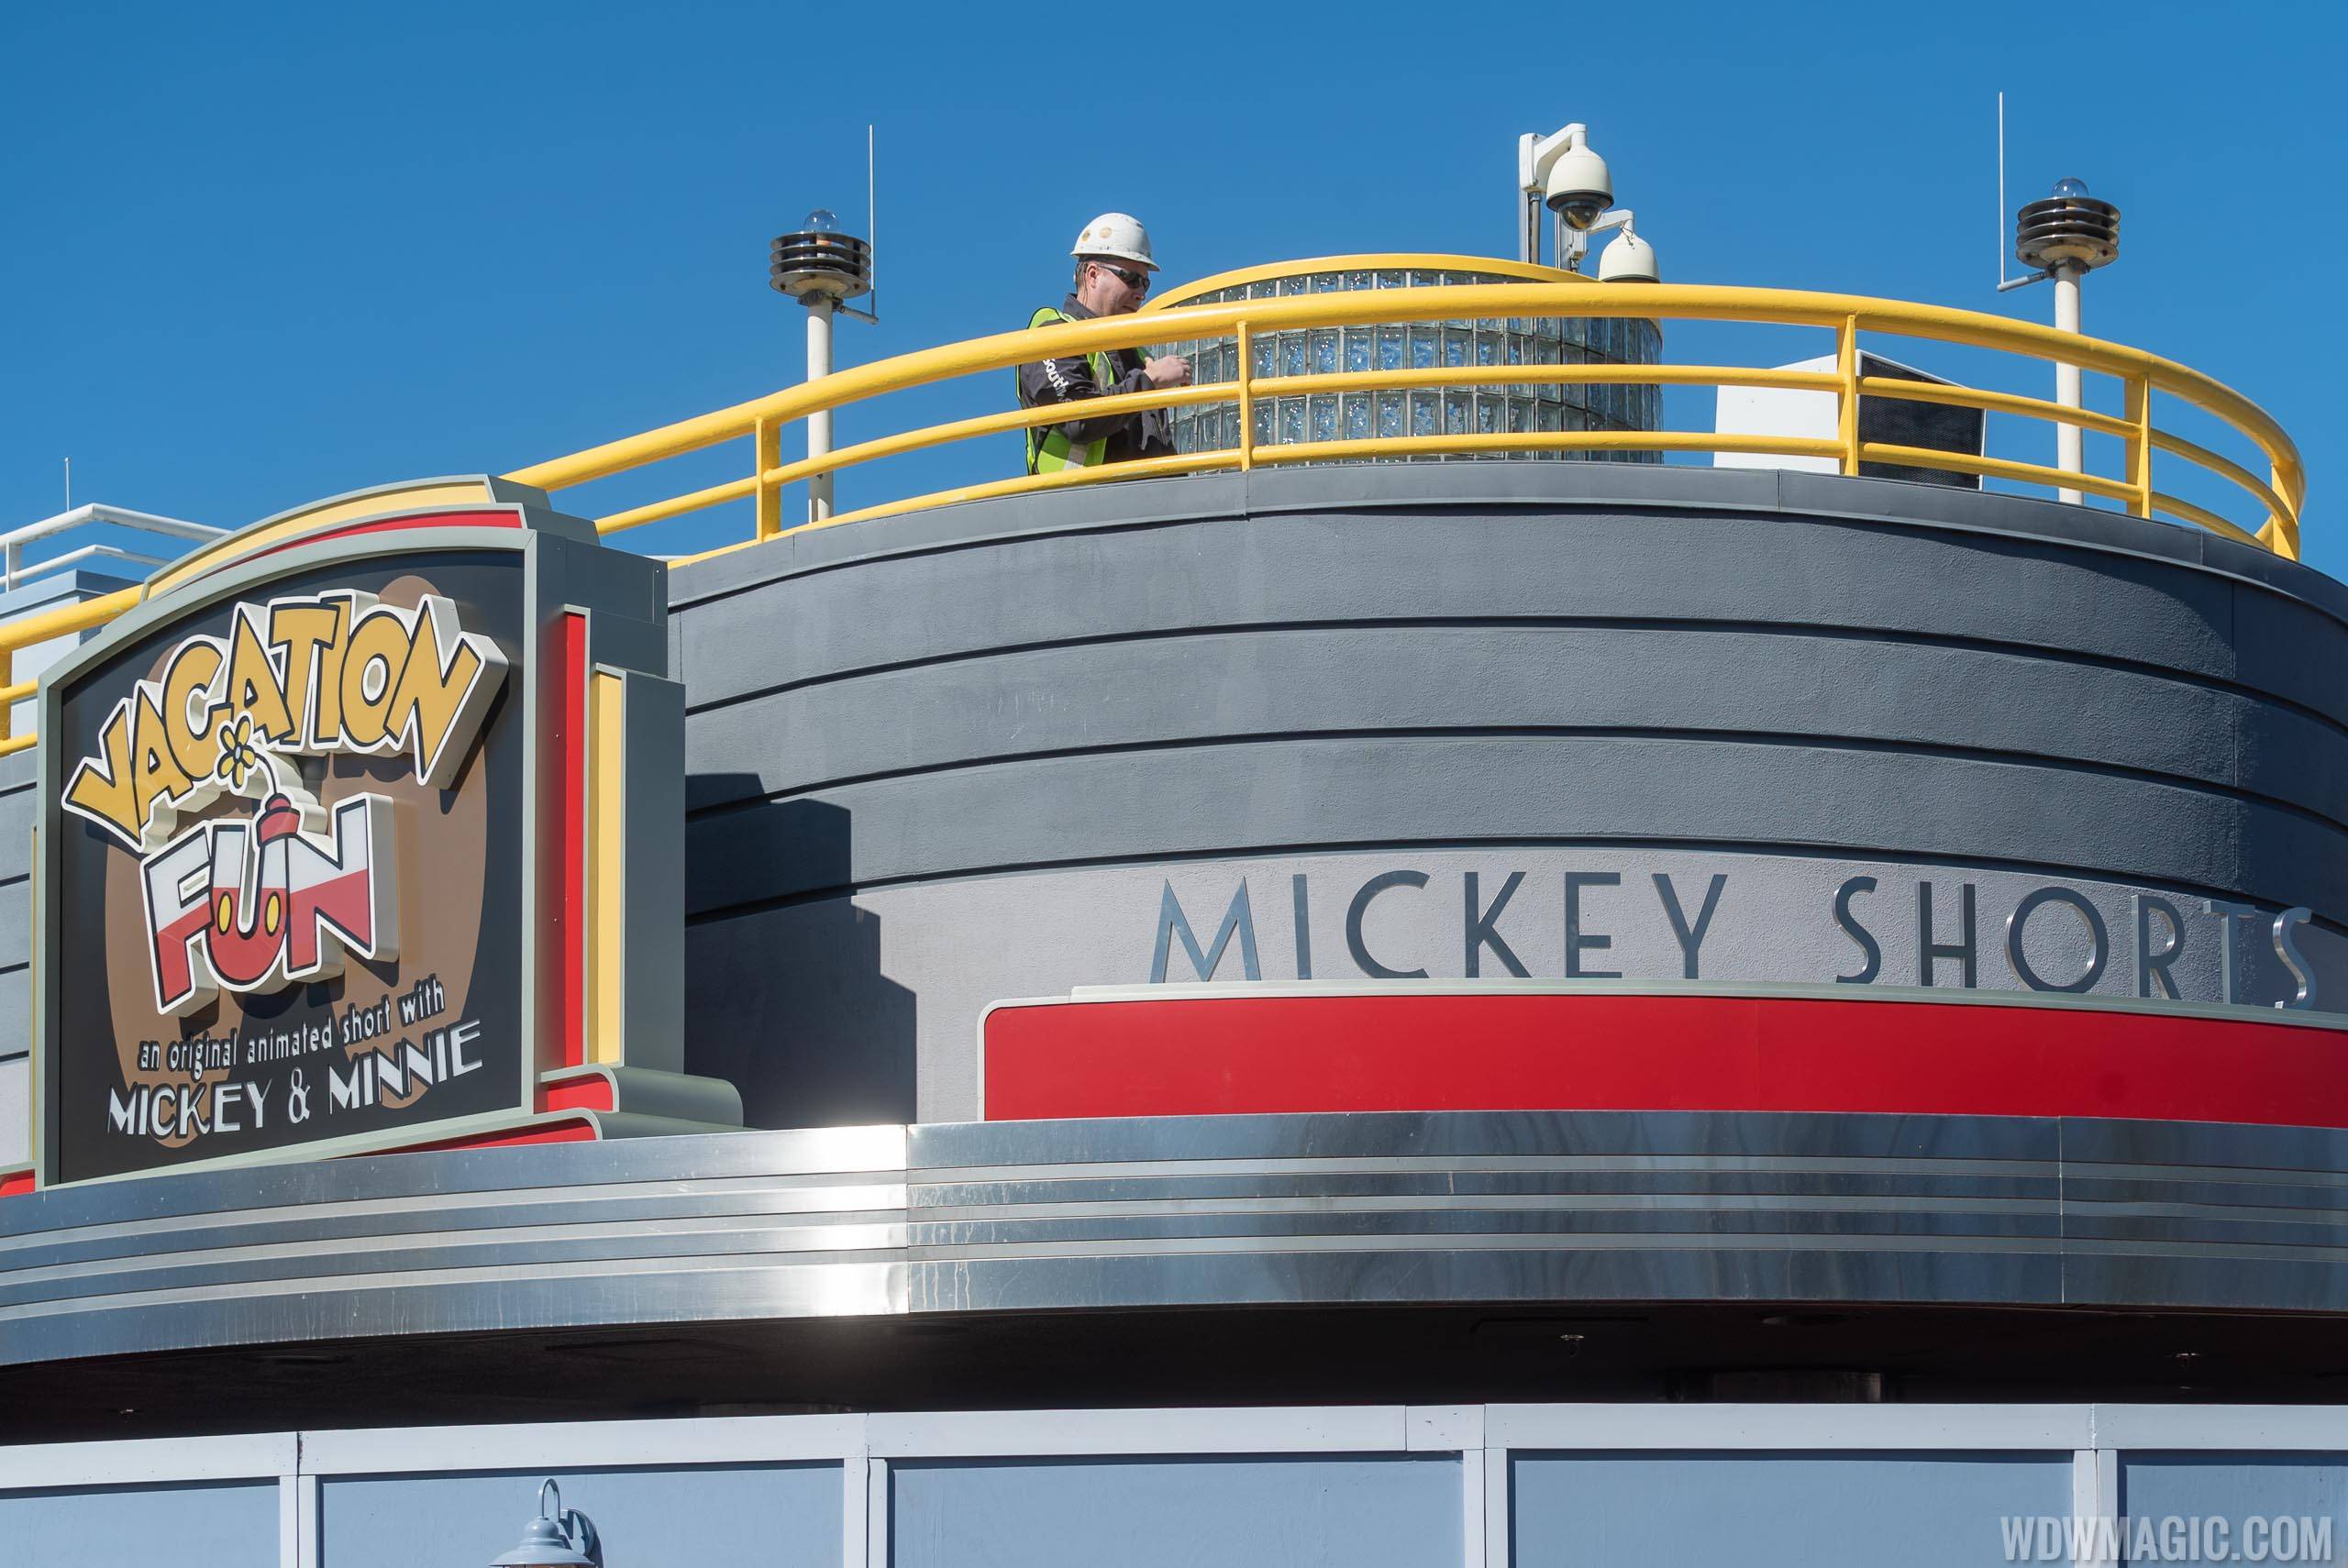 PHOTOS - Finishing touches being applied to the Mickey Shorts Theater ahead of next week's opening